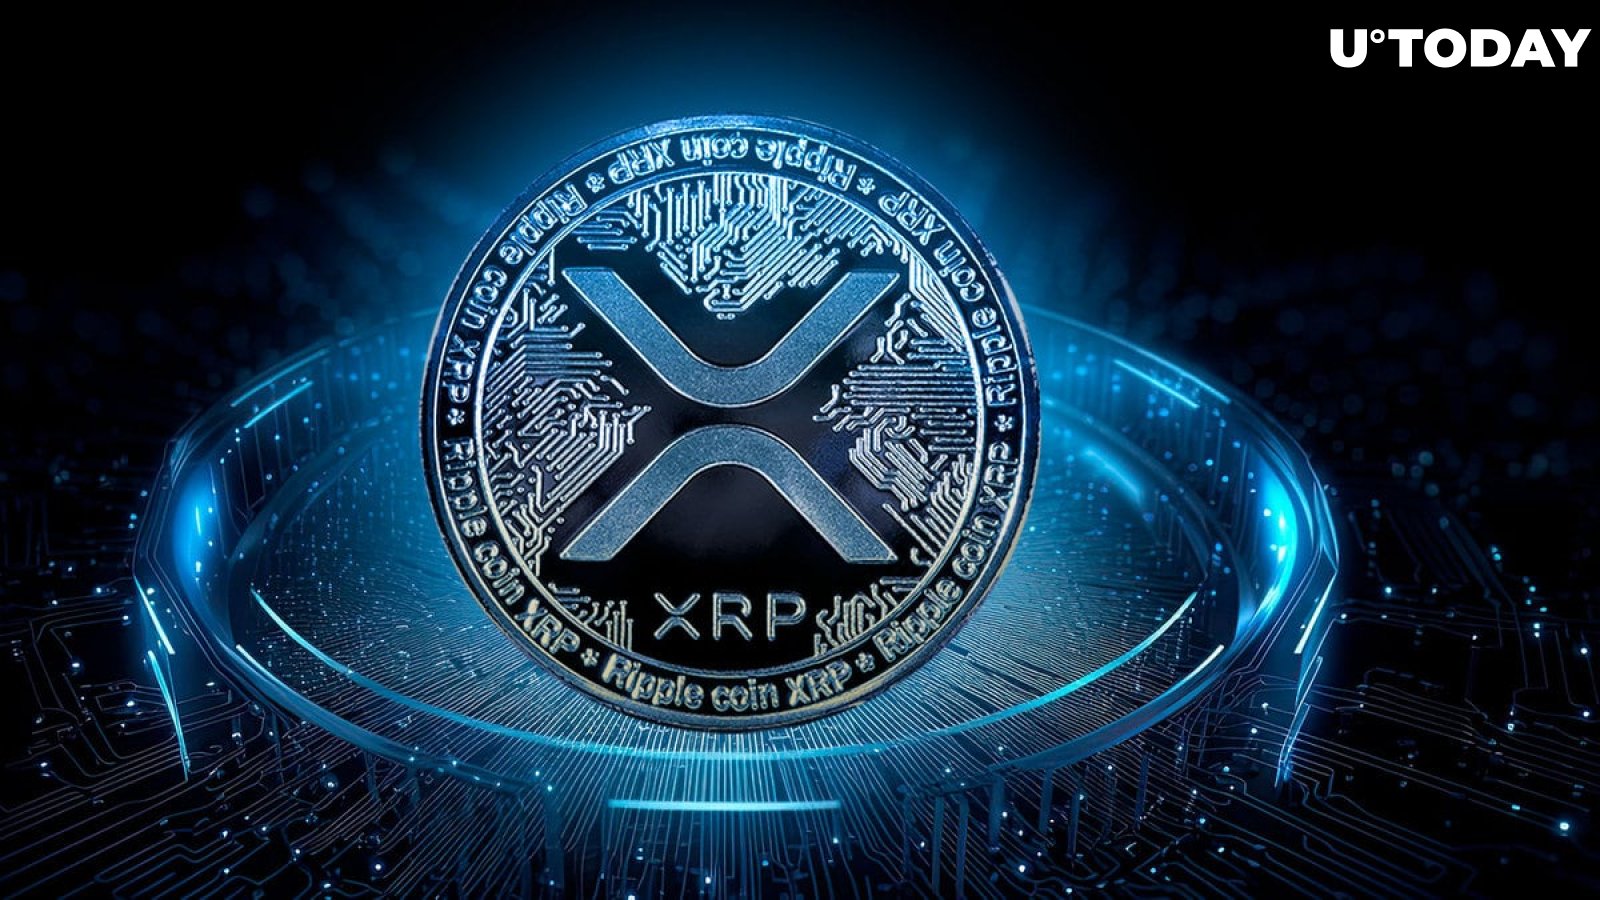 XRP ETF Likely After Bitcoin Approval, Valkyrie's Investment Chief Says